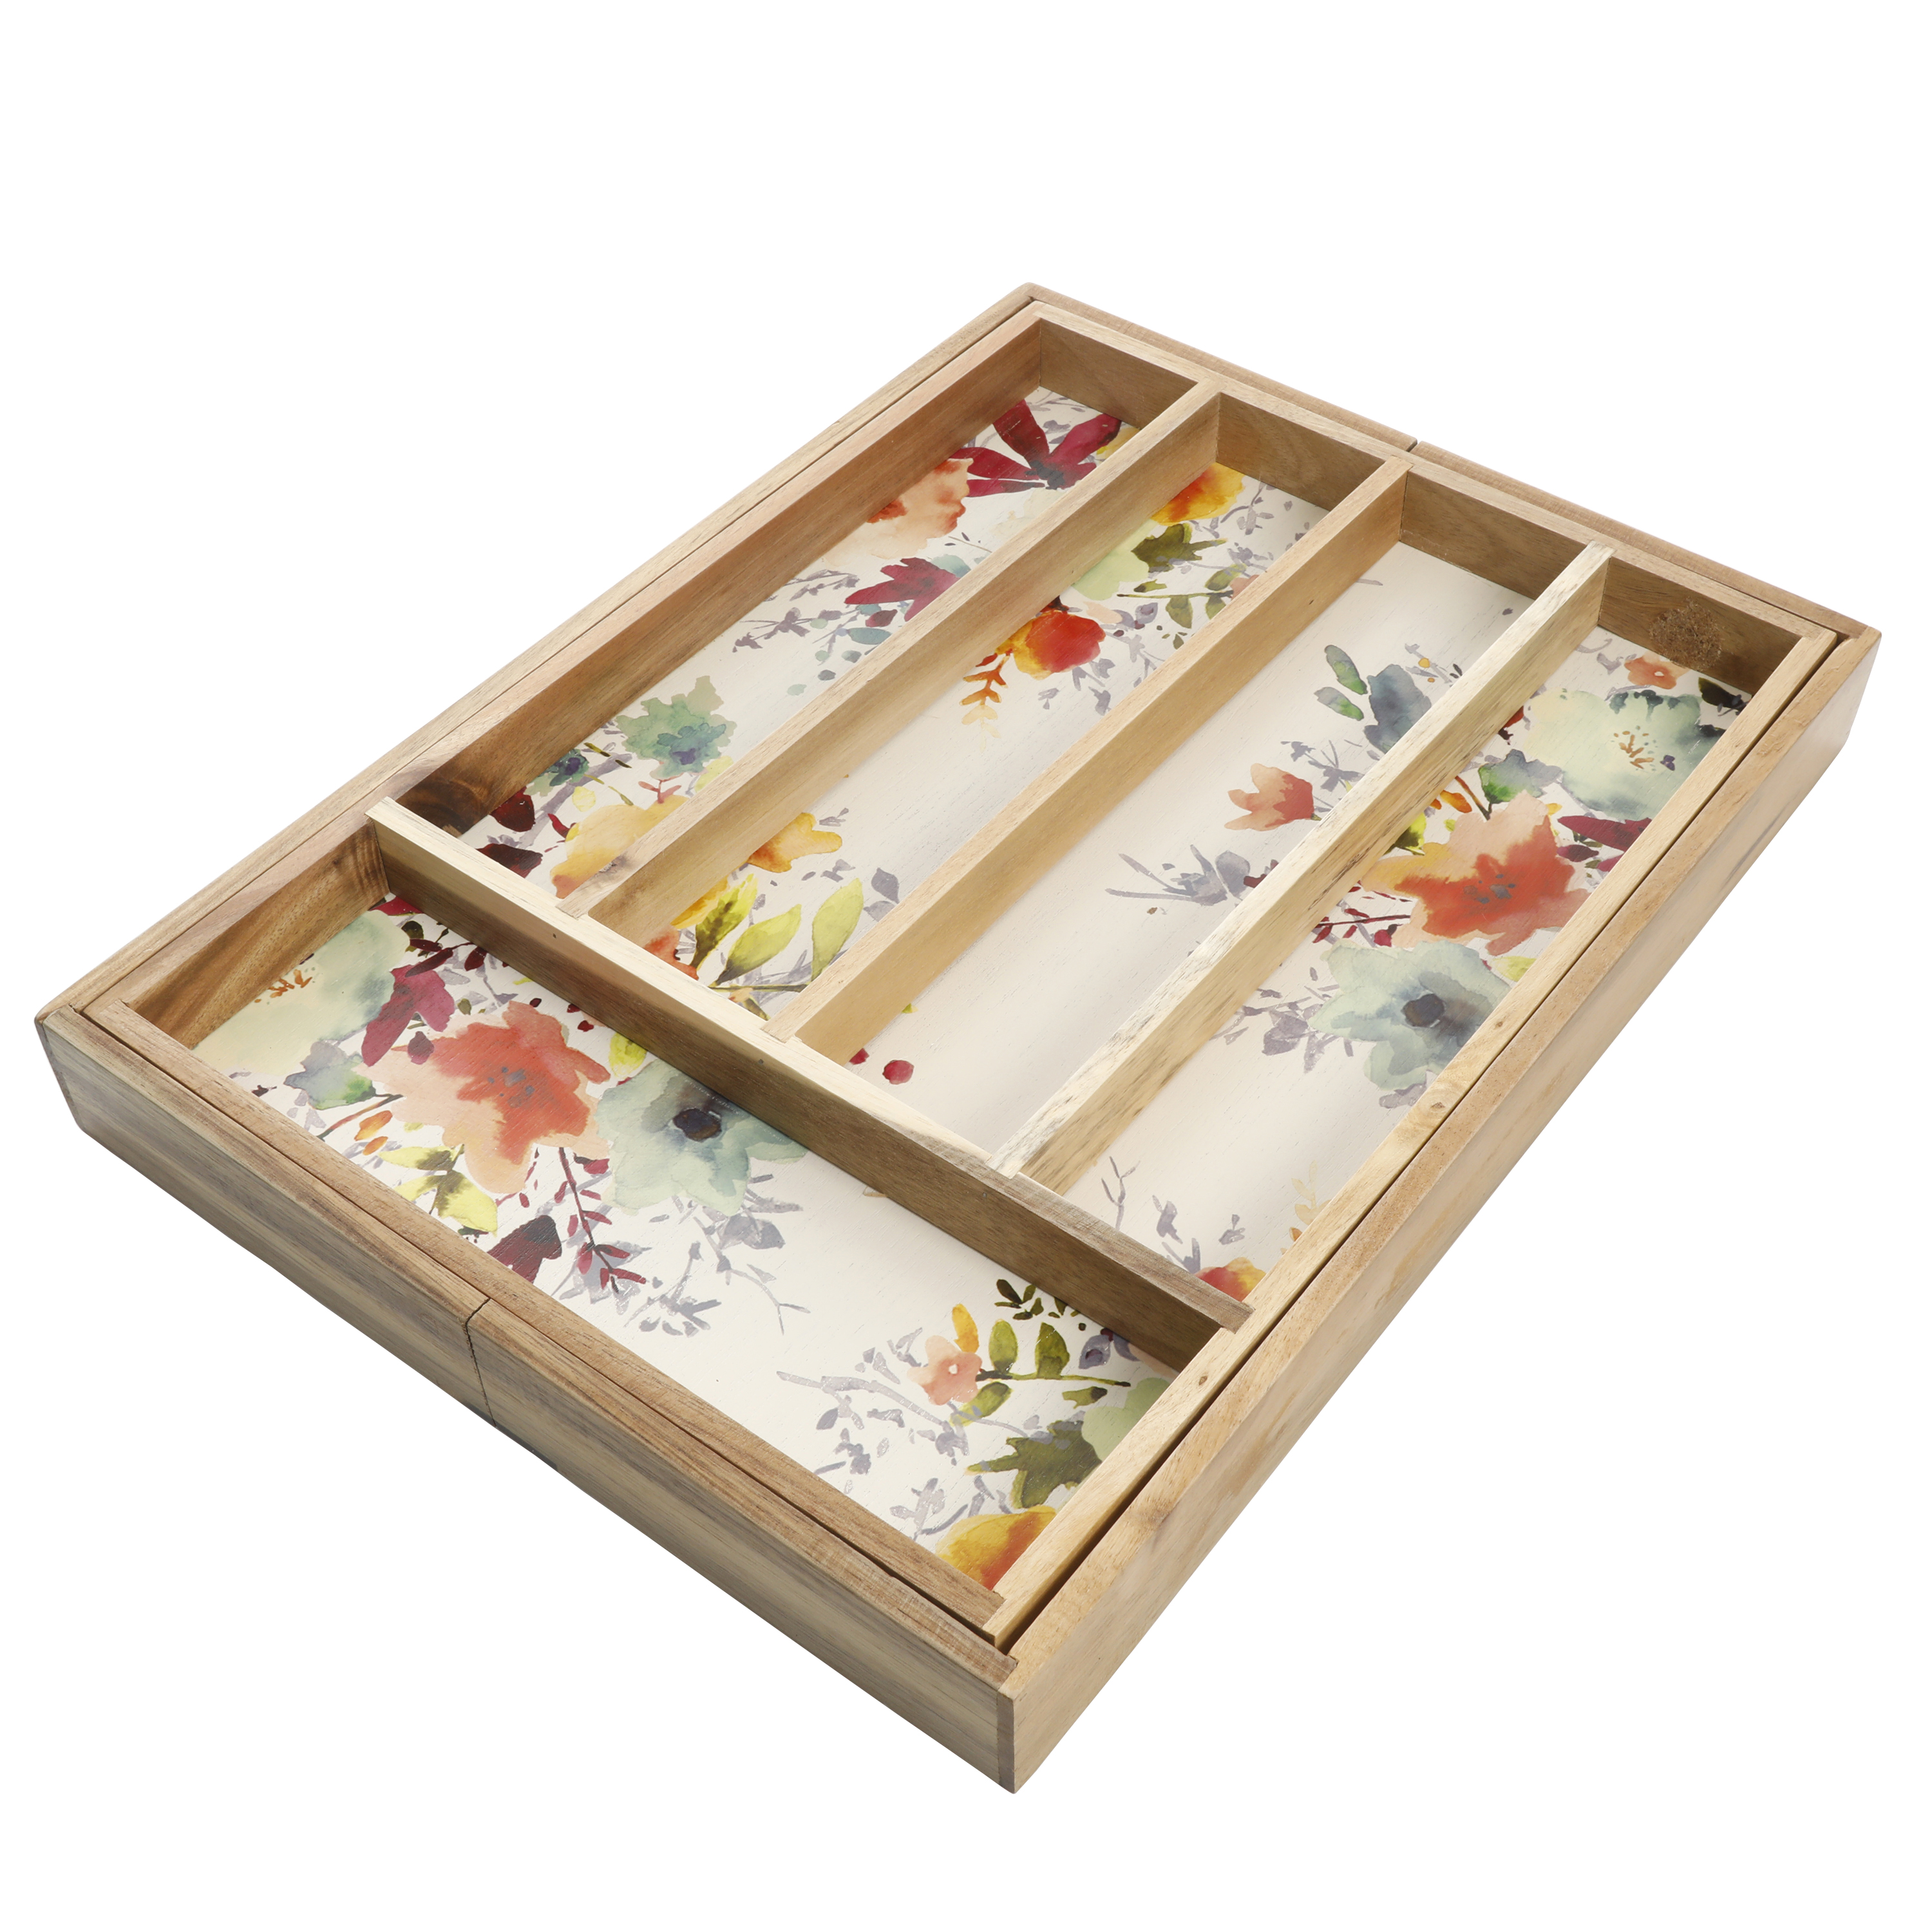 The Pioneer Woman Willow Acacia Wood Expandable Silverware Organizer, 18 x 13 Inch - image 2 of 8